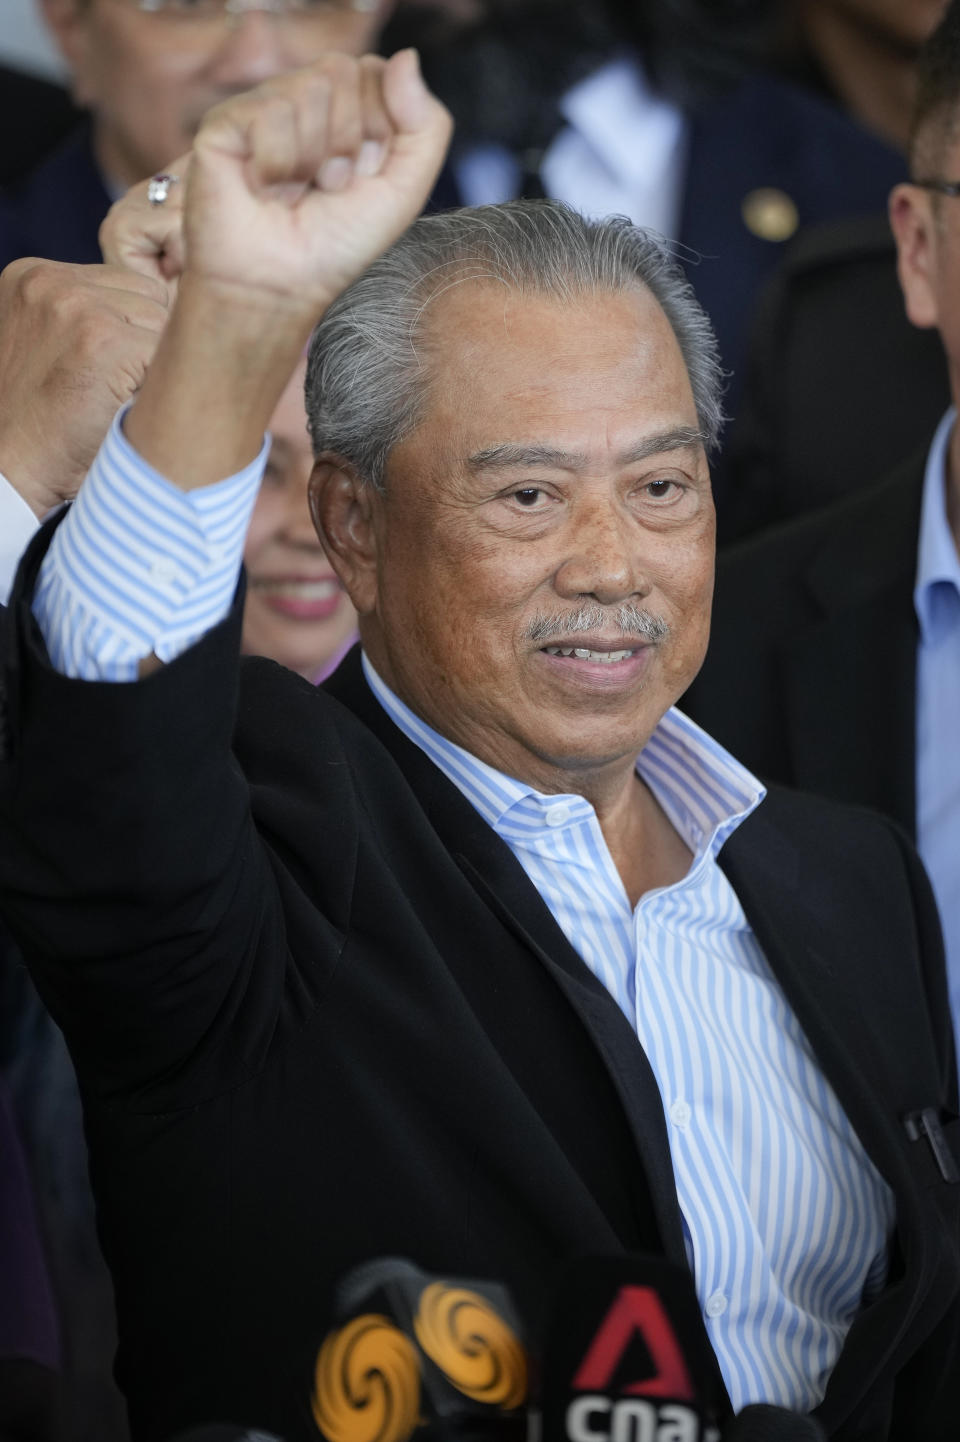 Malaysia's former Prime Minister Muhyiddin Yassin poses for media outside courthouse, after charged with corruption and money laundering, in Kuala Lumpur, Malaysia, Friday, March 10, 2023. Muhyiddin has been charged with corruption and money laundering, making him Malaysia's second ex-leader to be indicted after leaving office. Muhyiddin pleaded innocent Friday to four charges of corruption and two charges of money laundering. (AP Photo/Vincent Thian)